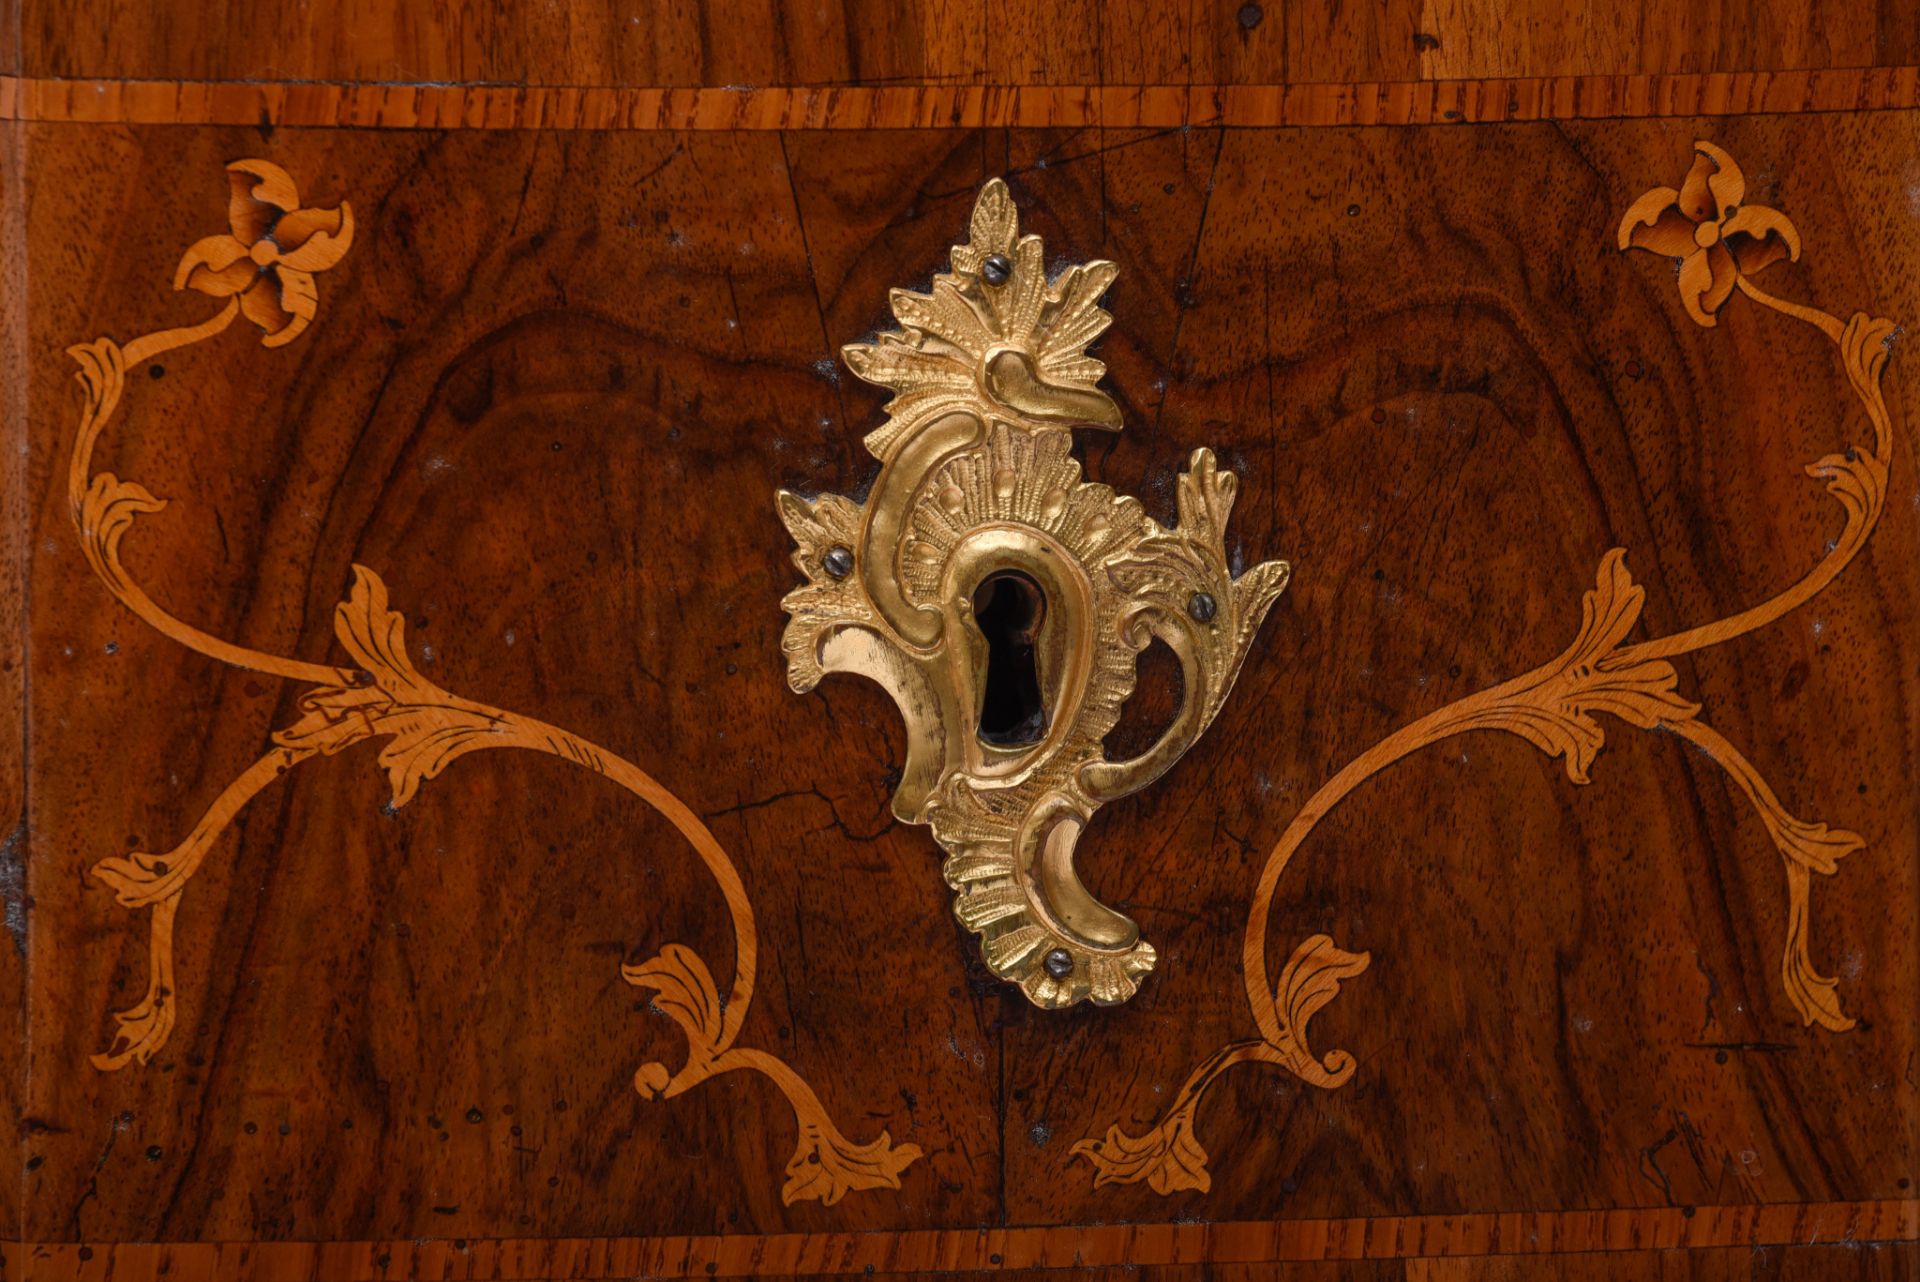 A magnificent German Rococo commode with elegant floral marquetry, mid 18thC, H 93 - W 112 - D 56 cm - Image 13 of 13